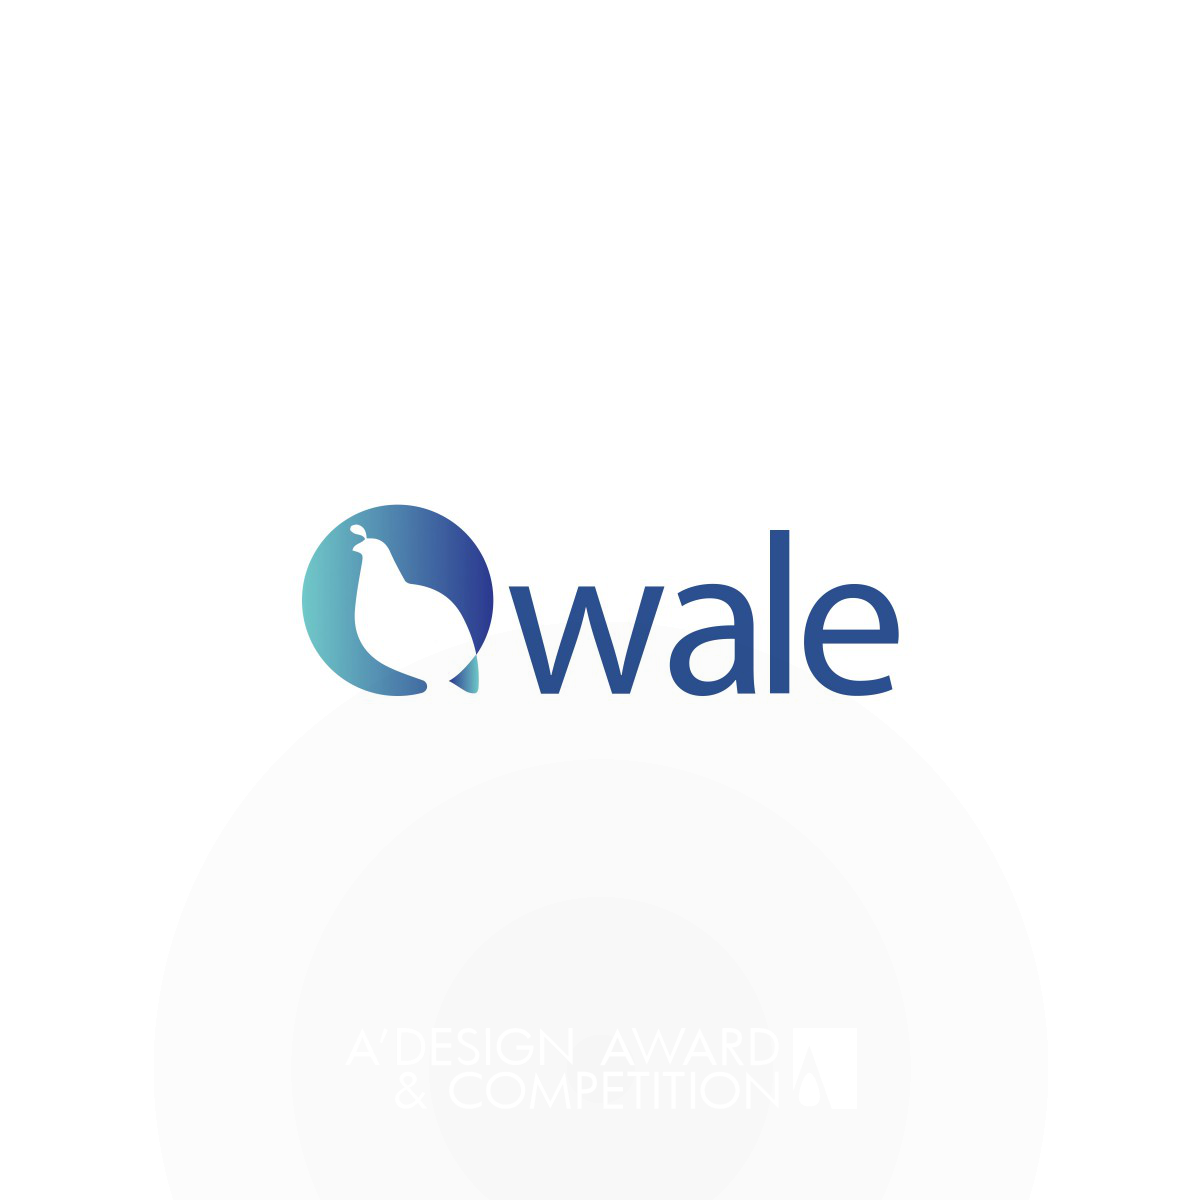 New Visual Direction of Qwale Brand Identity